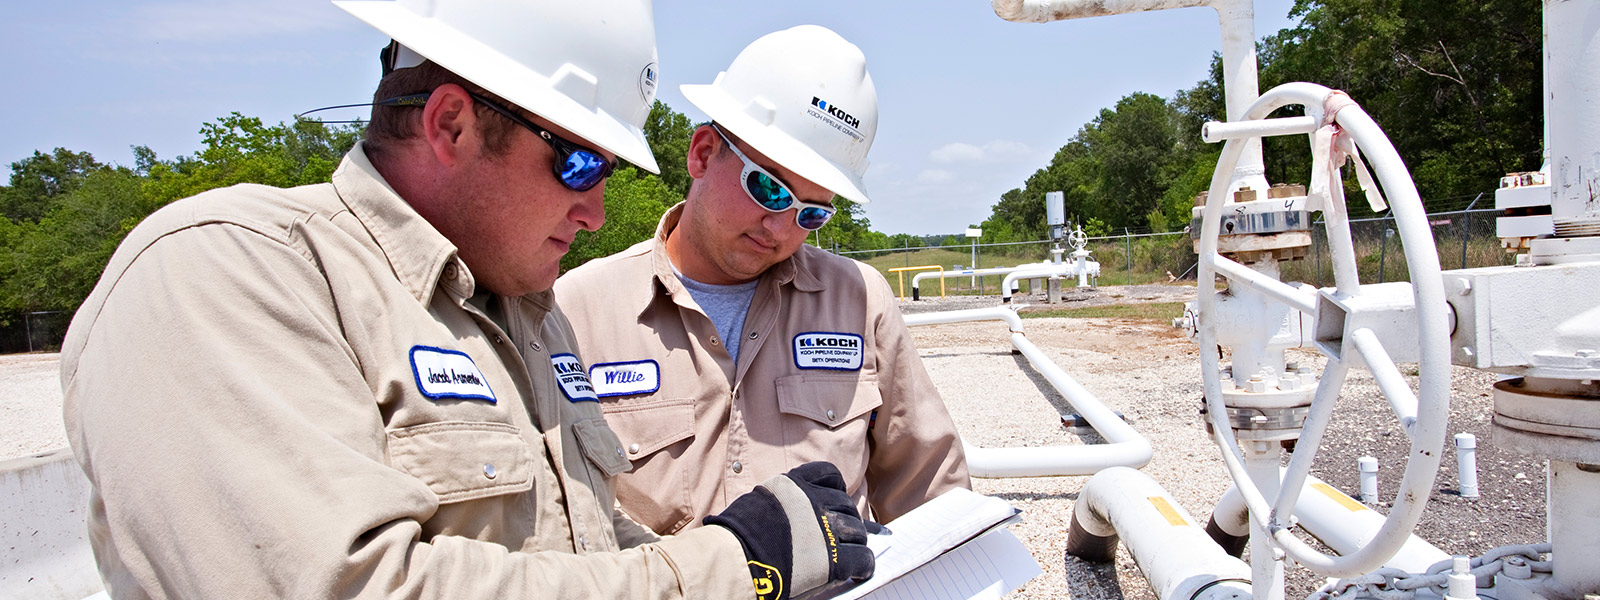 Koch Pipeline Company, L.P. Safety Performance Recognized